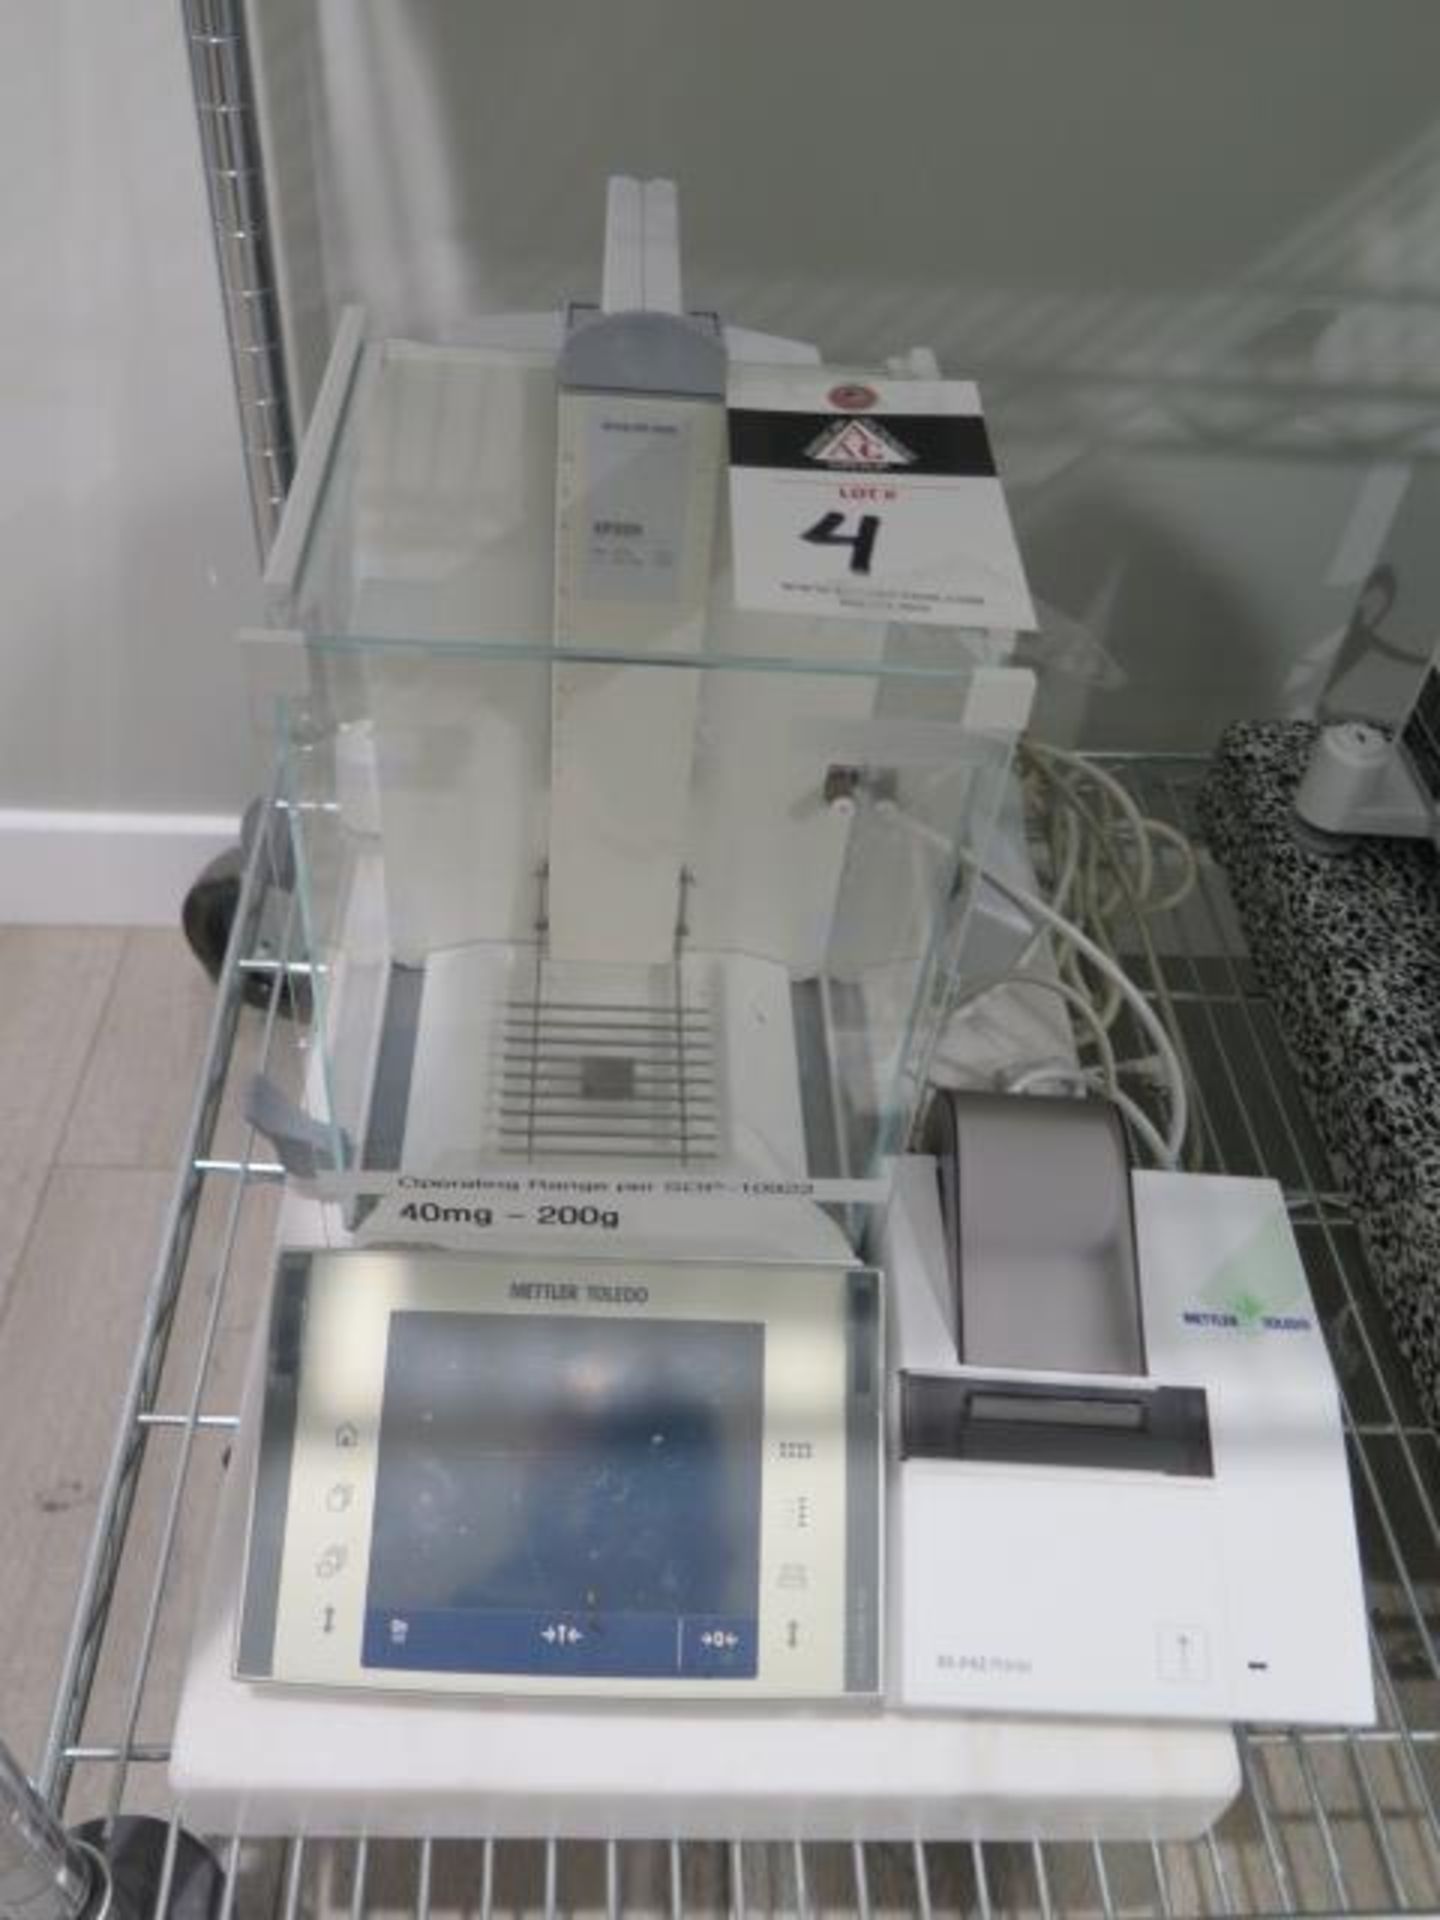 Mettler Toledo XP205 DeltaRange Analytical Balance Scale 0.01mg-220g w/ Static Detect, SOLD AS IS